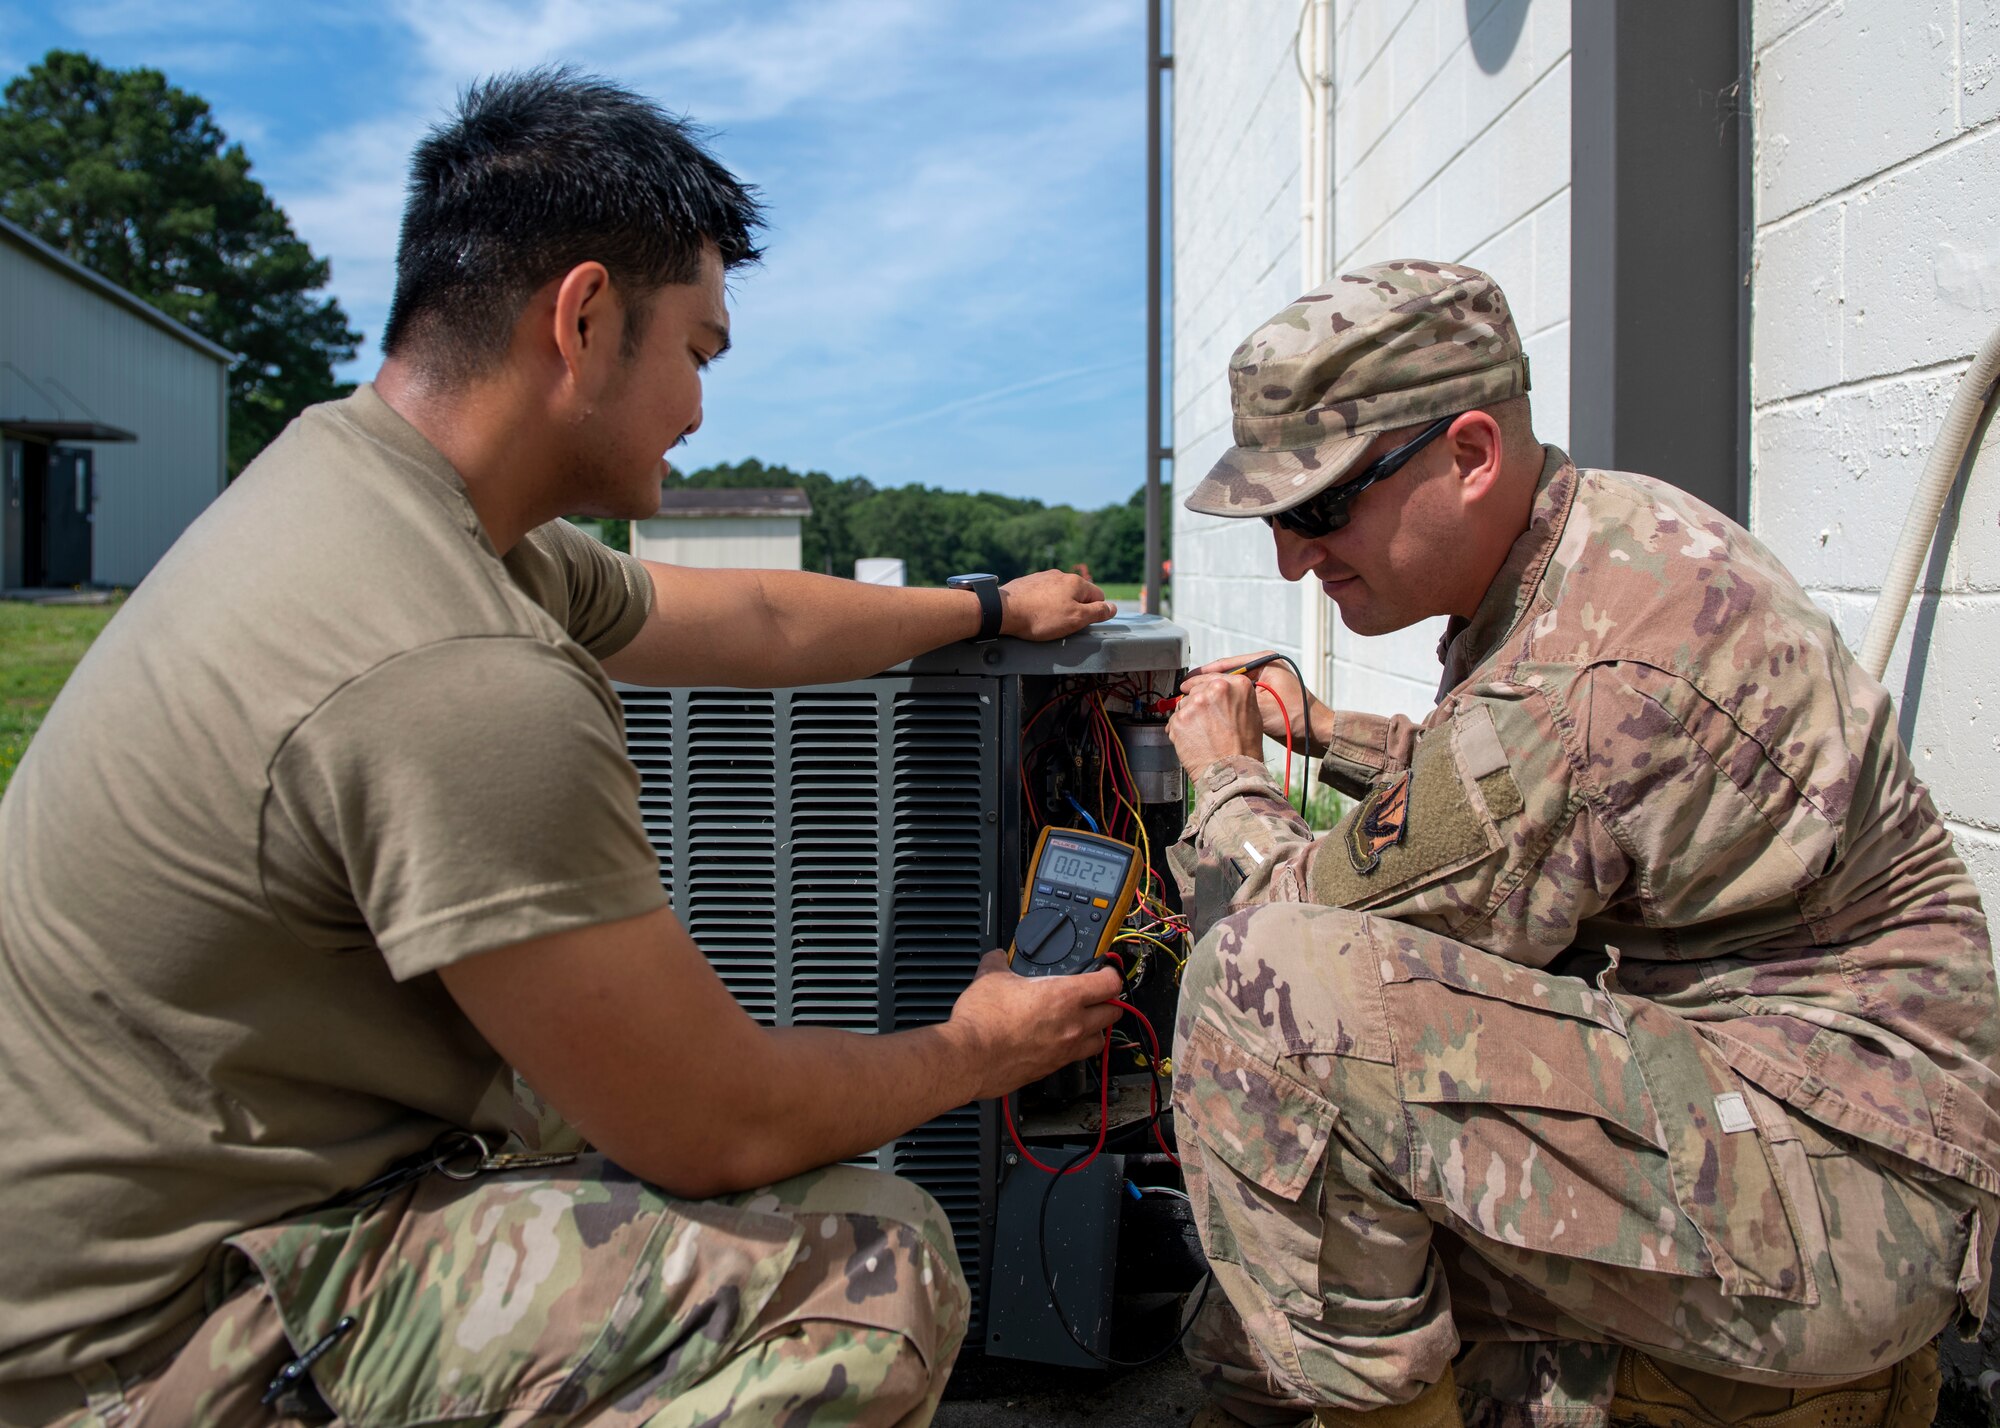 Senior Airman Joje Masaganda, left, and Staff Sgt. Mitchell Cole, 4th Civil Engineer Squadron heating, ventilation, air conditioning and refrigeration technicians, use a multimeter to check components of a split system air conditioning unit for power loss at Seymour Johnson Air Force Base, North Carolina, June 14, 2021.